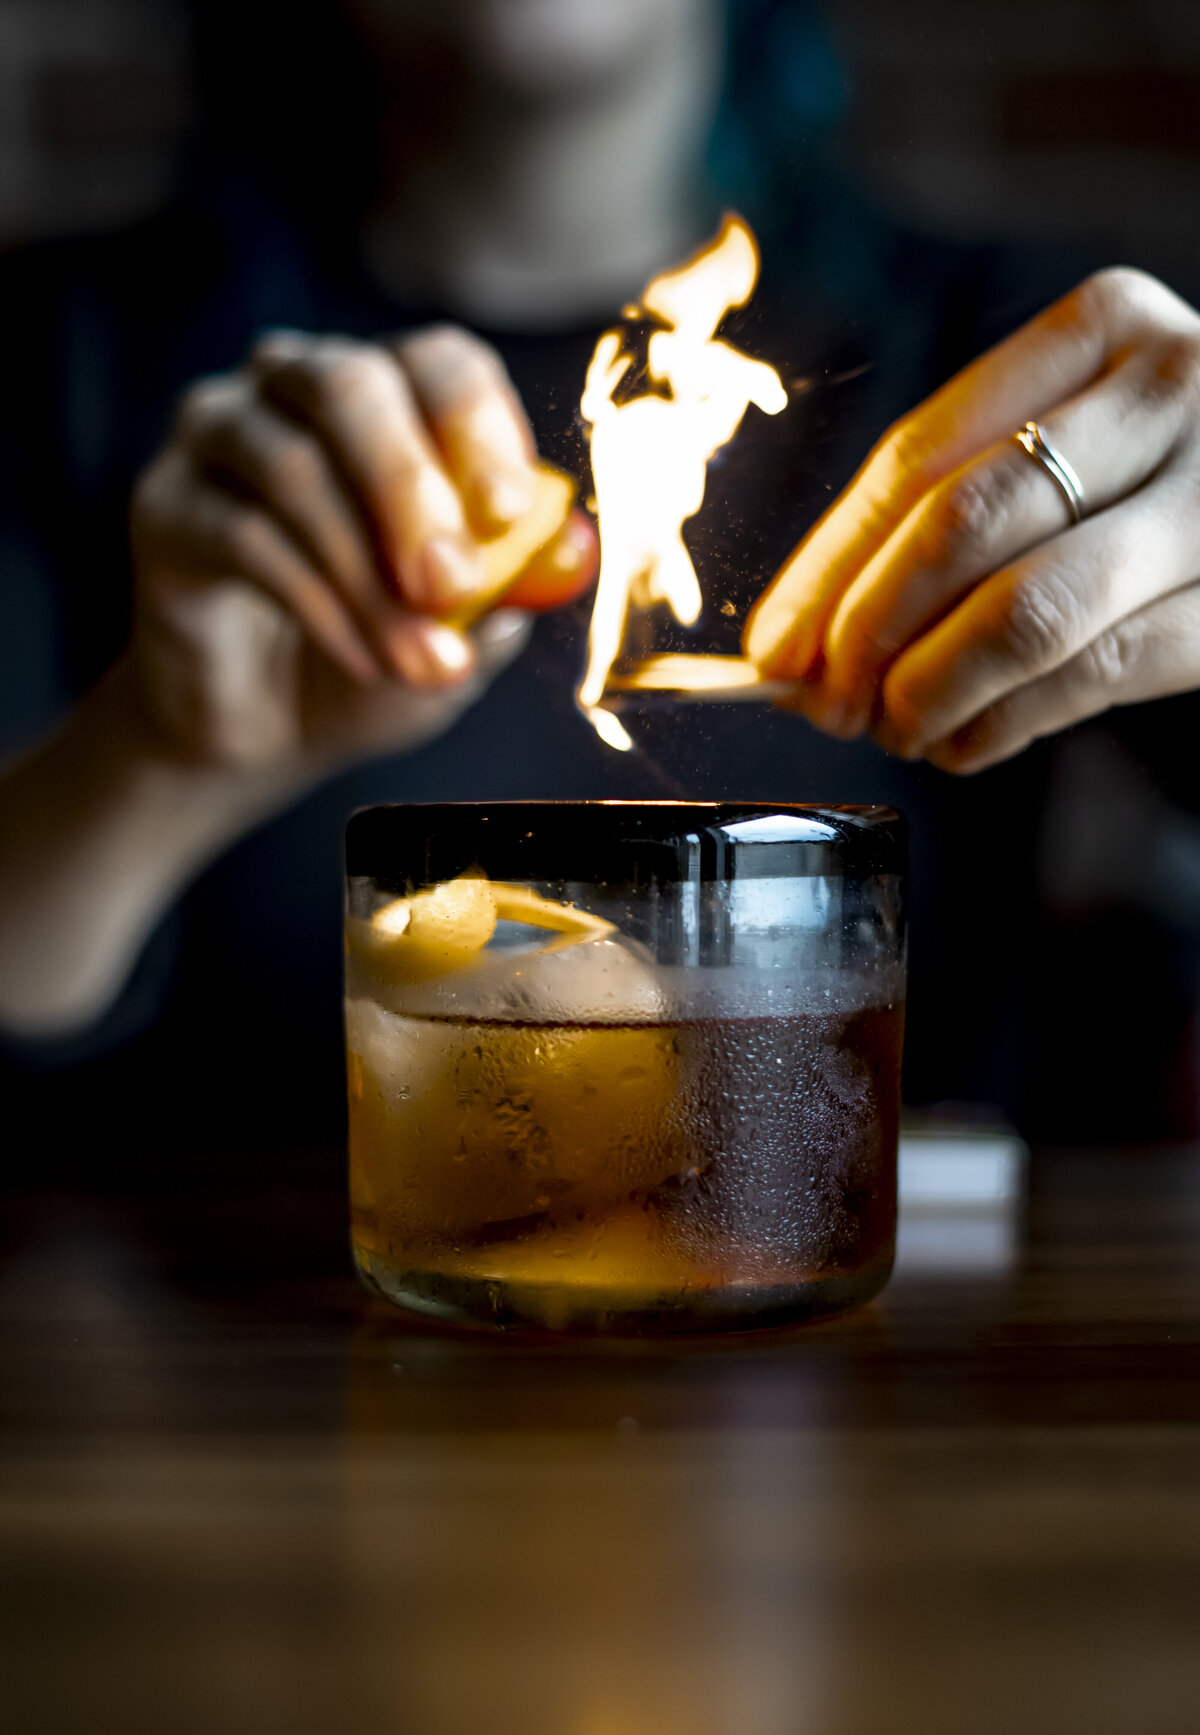 Match being struck over artisan cocktail as its made.